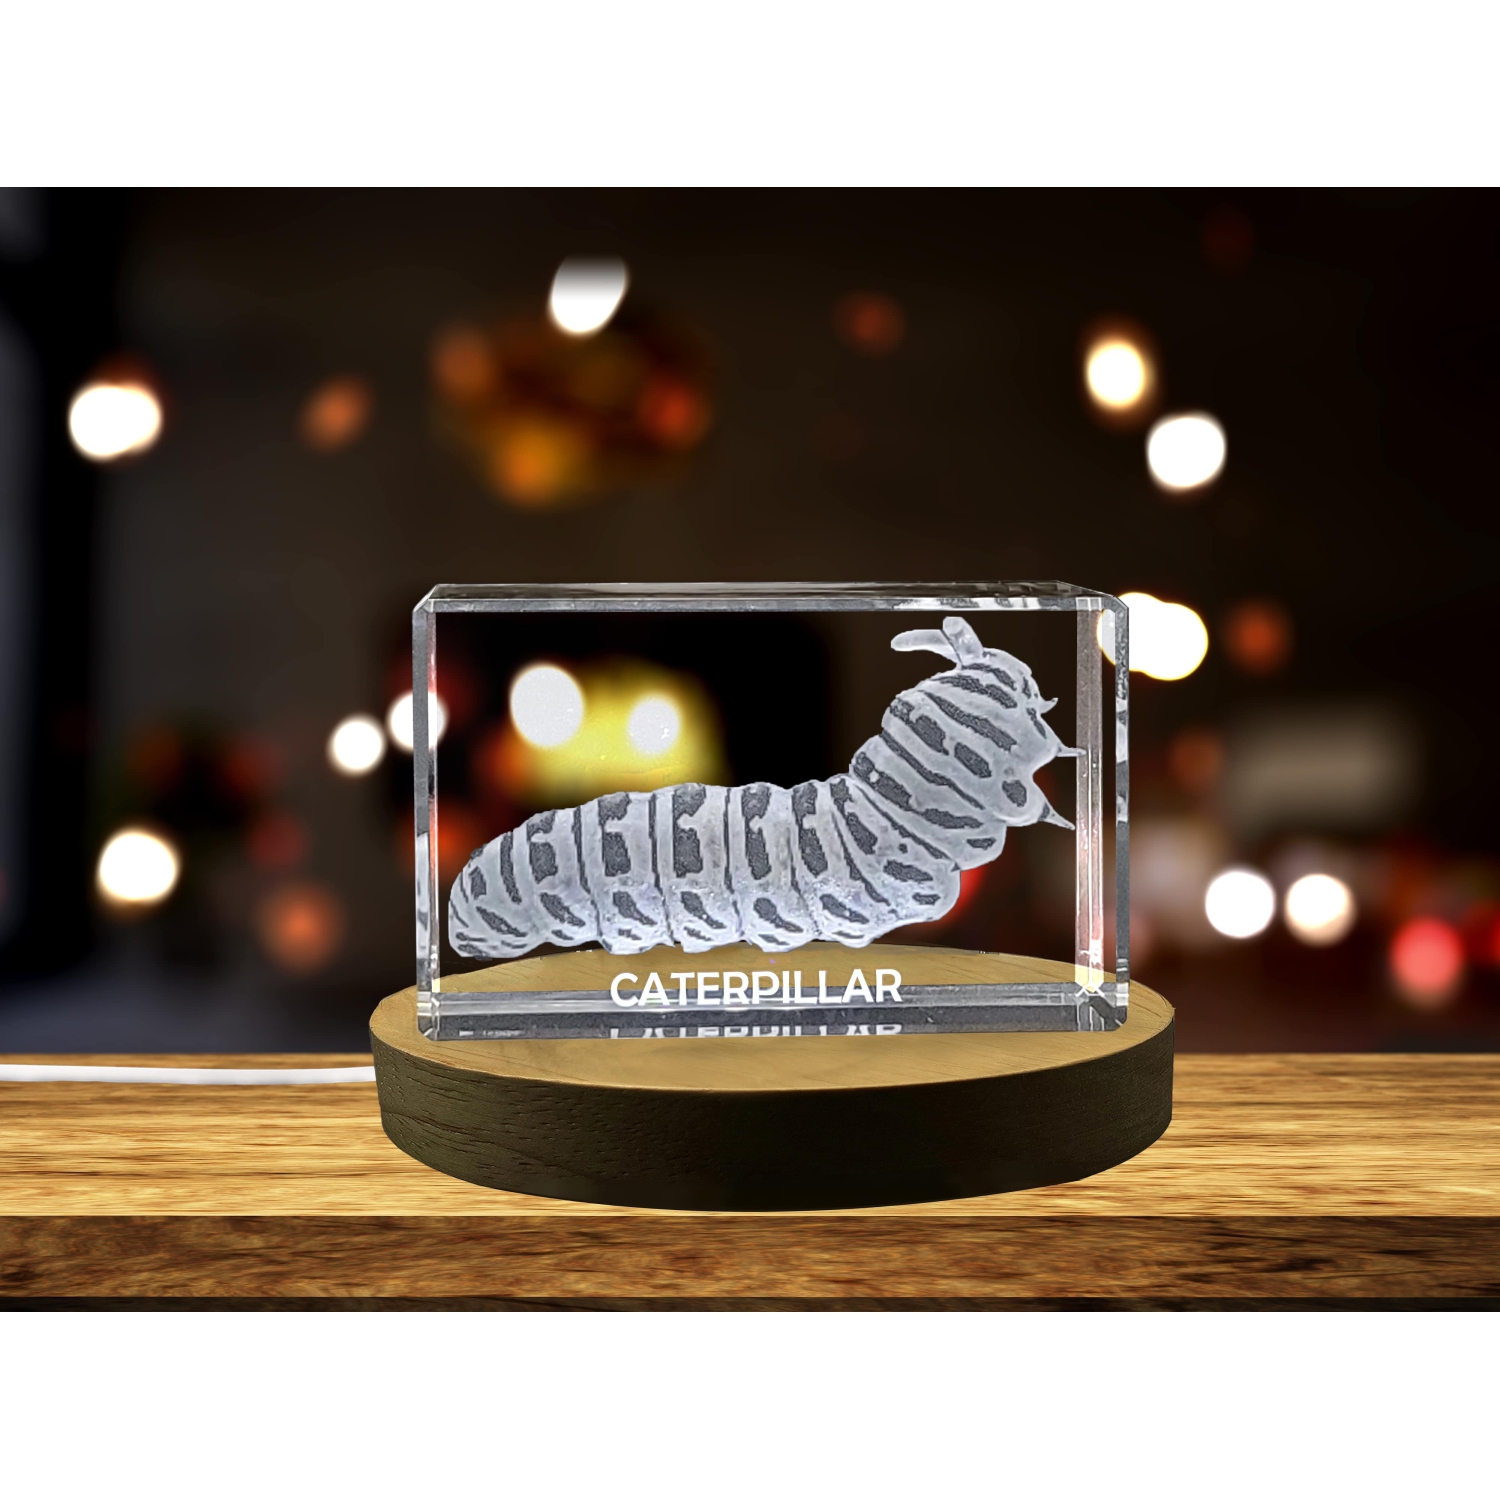 Unique 3D Engraved Crystal with Caterpillar Design - Perfect Gift for Nature Lovers